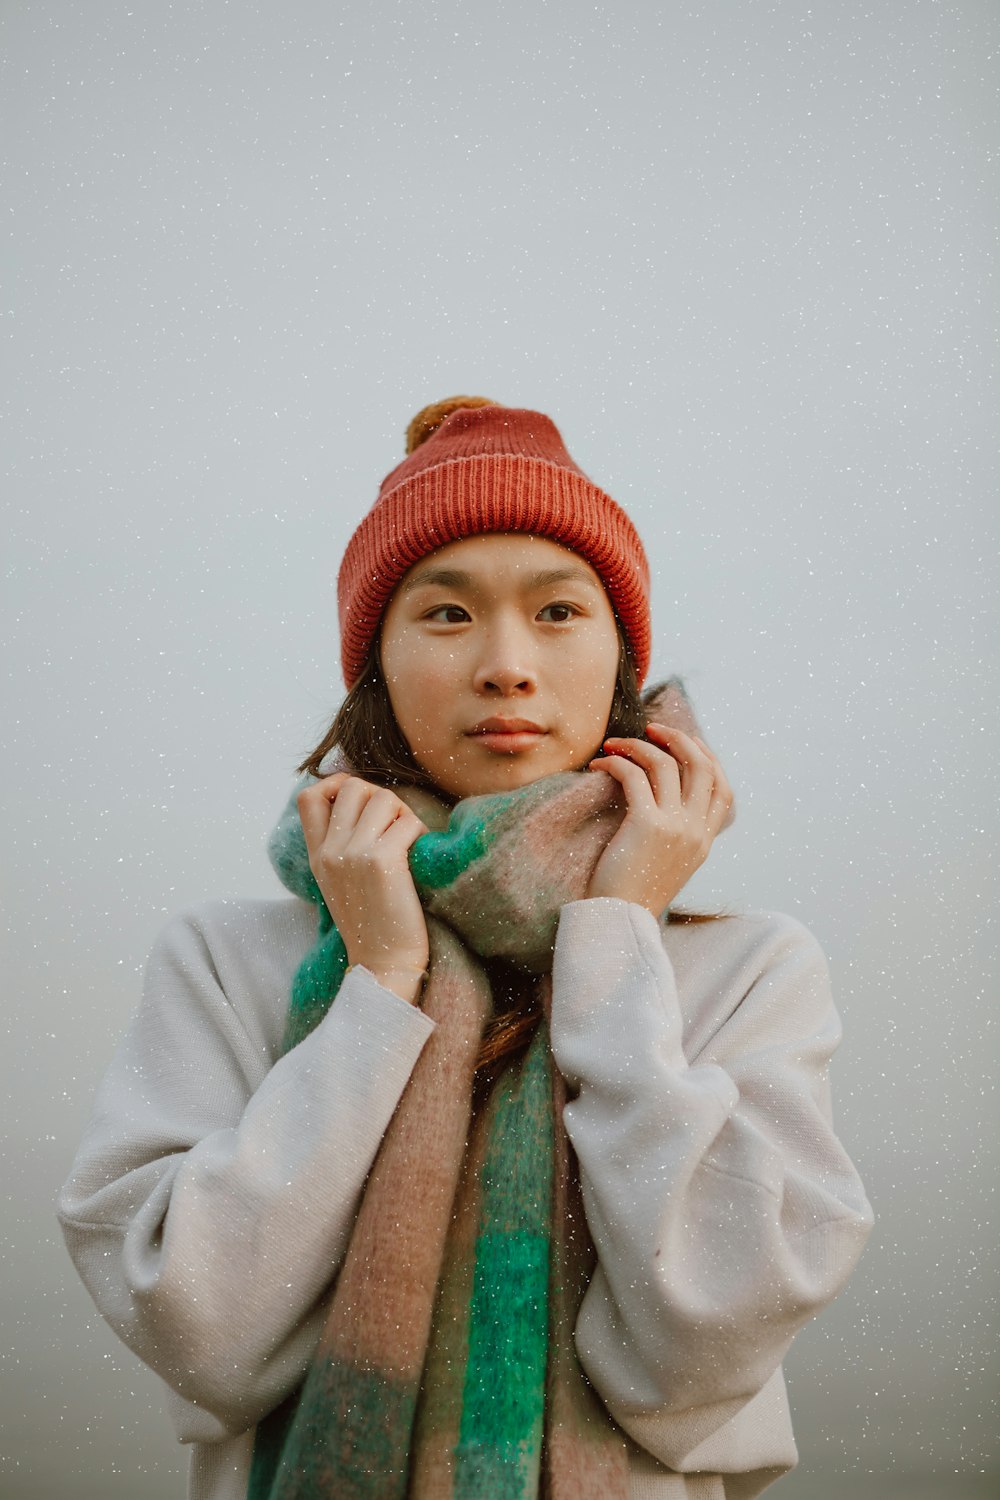 woman in white coat and red knit cap